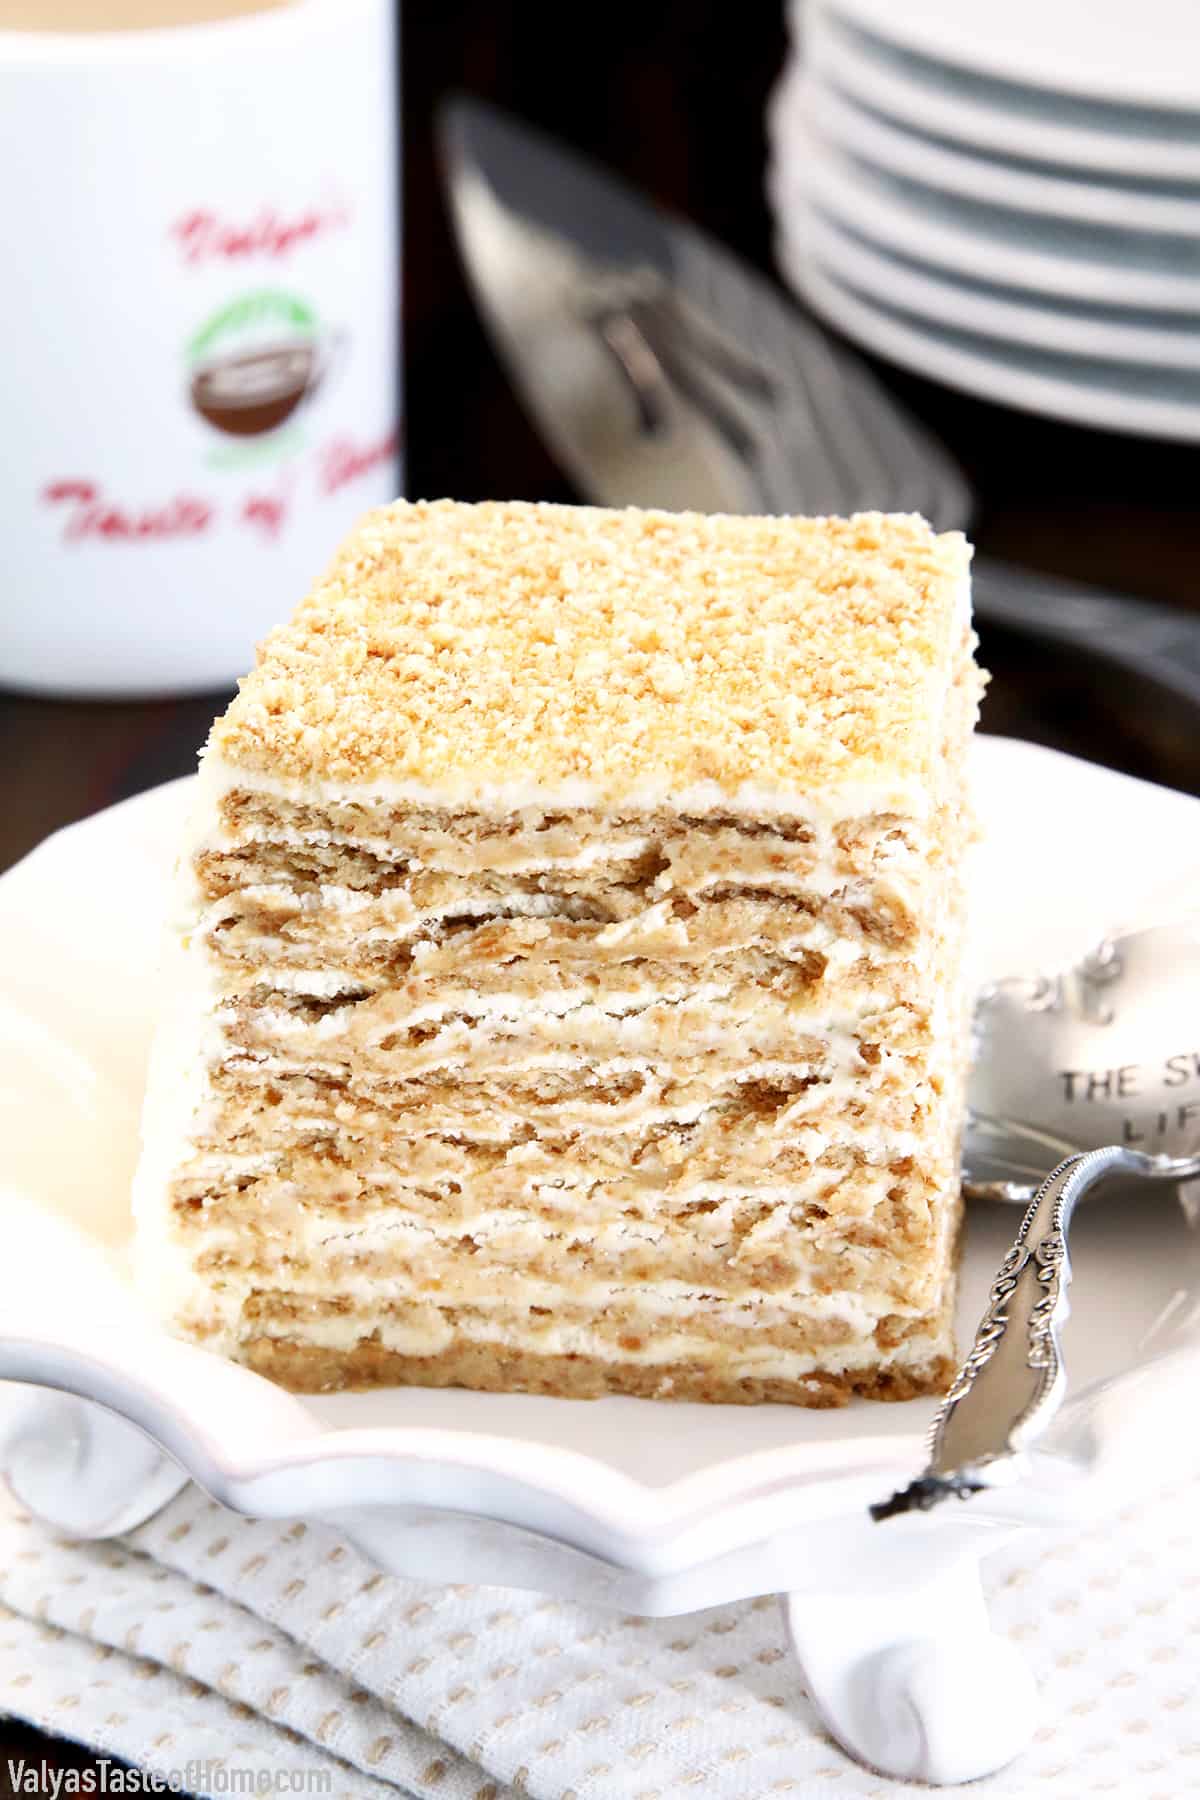 Sometimes we all need a bit of a break from the hot oven, right? Or maybe you're in a time crunch but need to produce a delicious dessert. Well, this No Bake Honey Graham Cracker Cake will come to your rescue! You ONLY need 3 ingredients! No baking required.